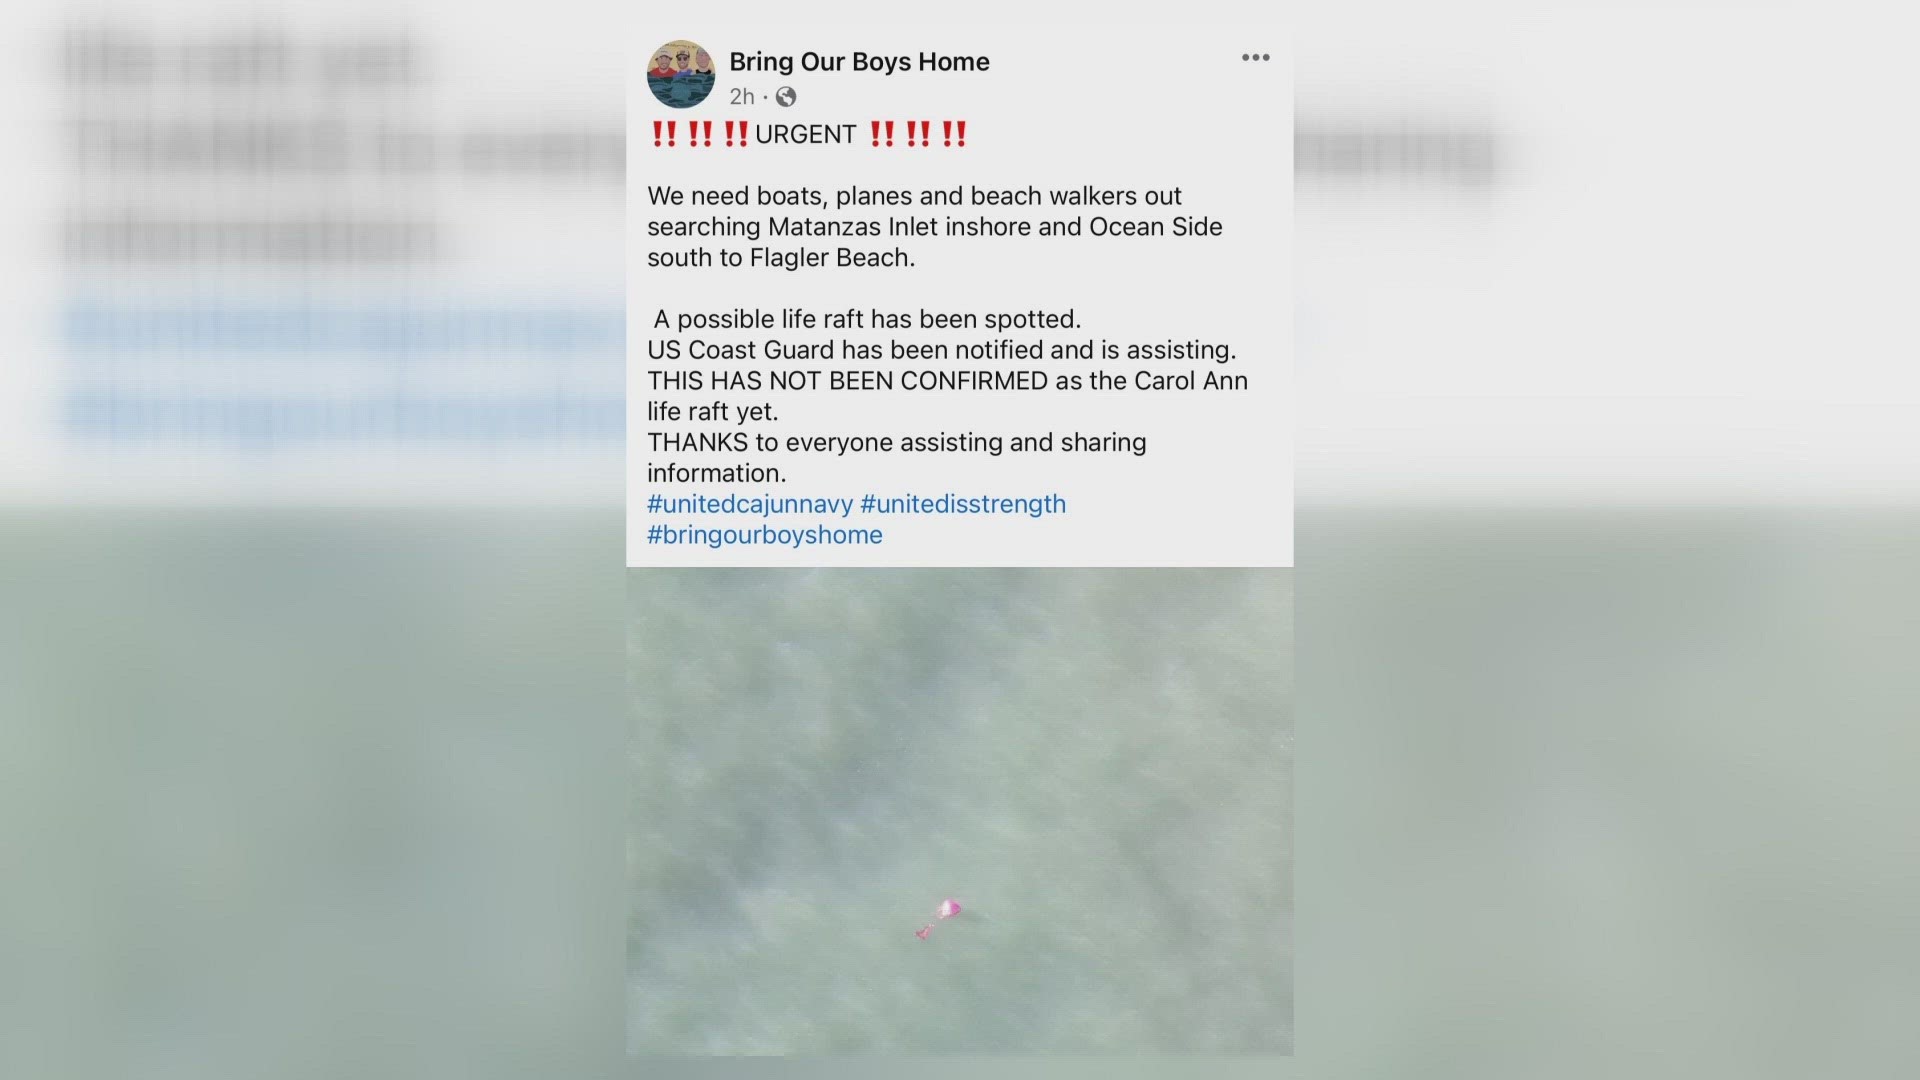 The crew of a helicopter commissioned by the boaters' families believes they saw a red life raft Monday.